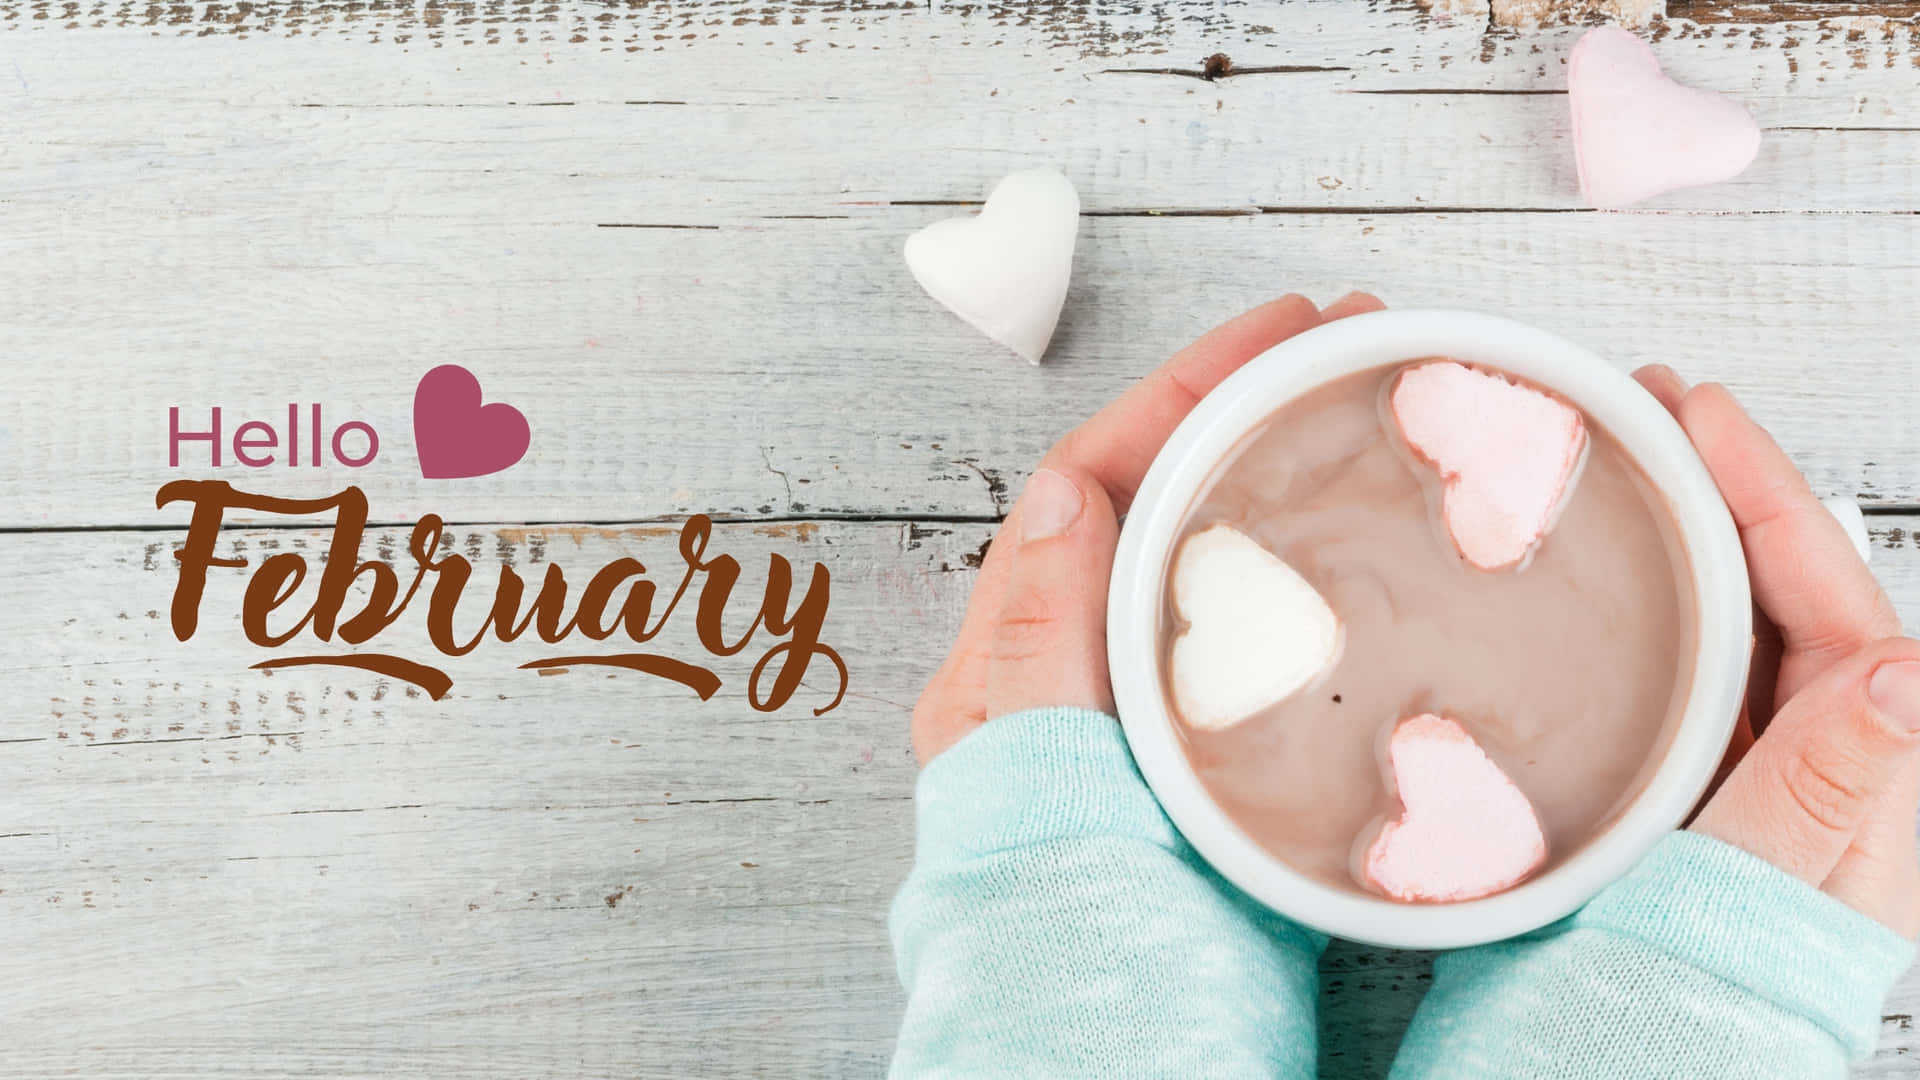 Hello February Hot Chocolate With Hearts Wallpaper